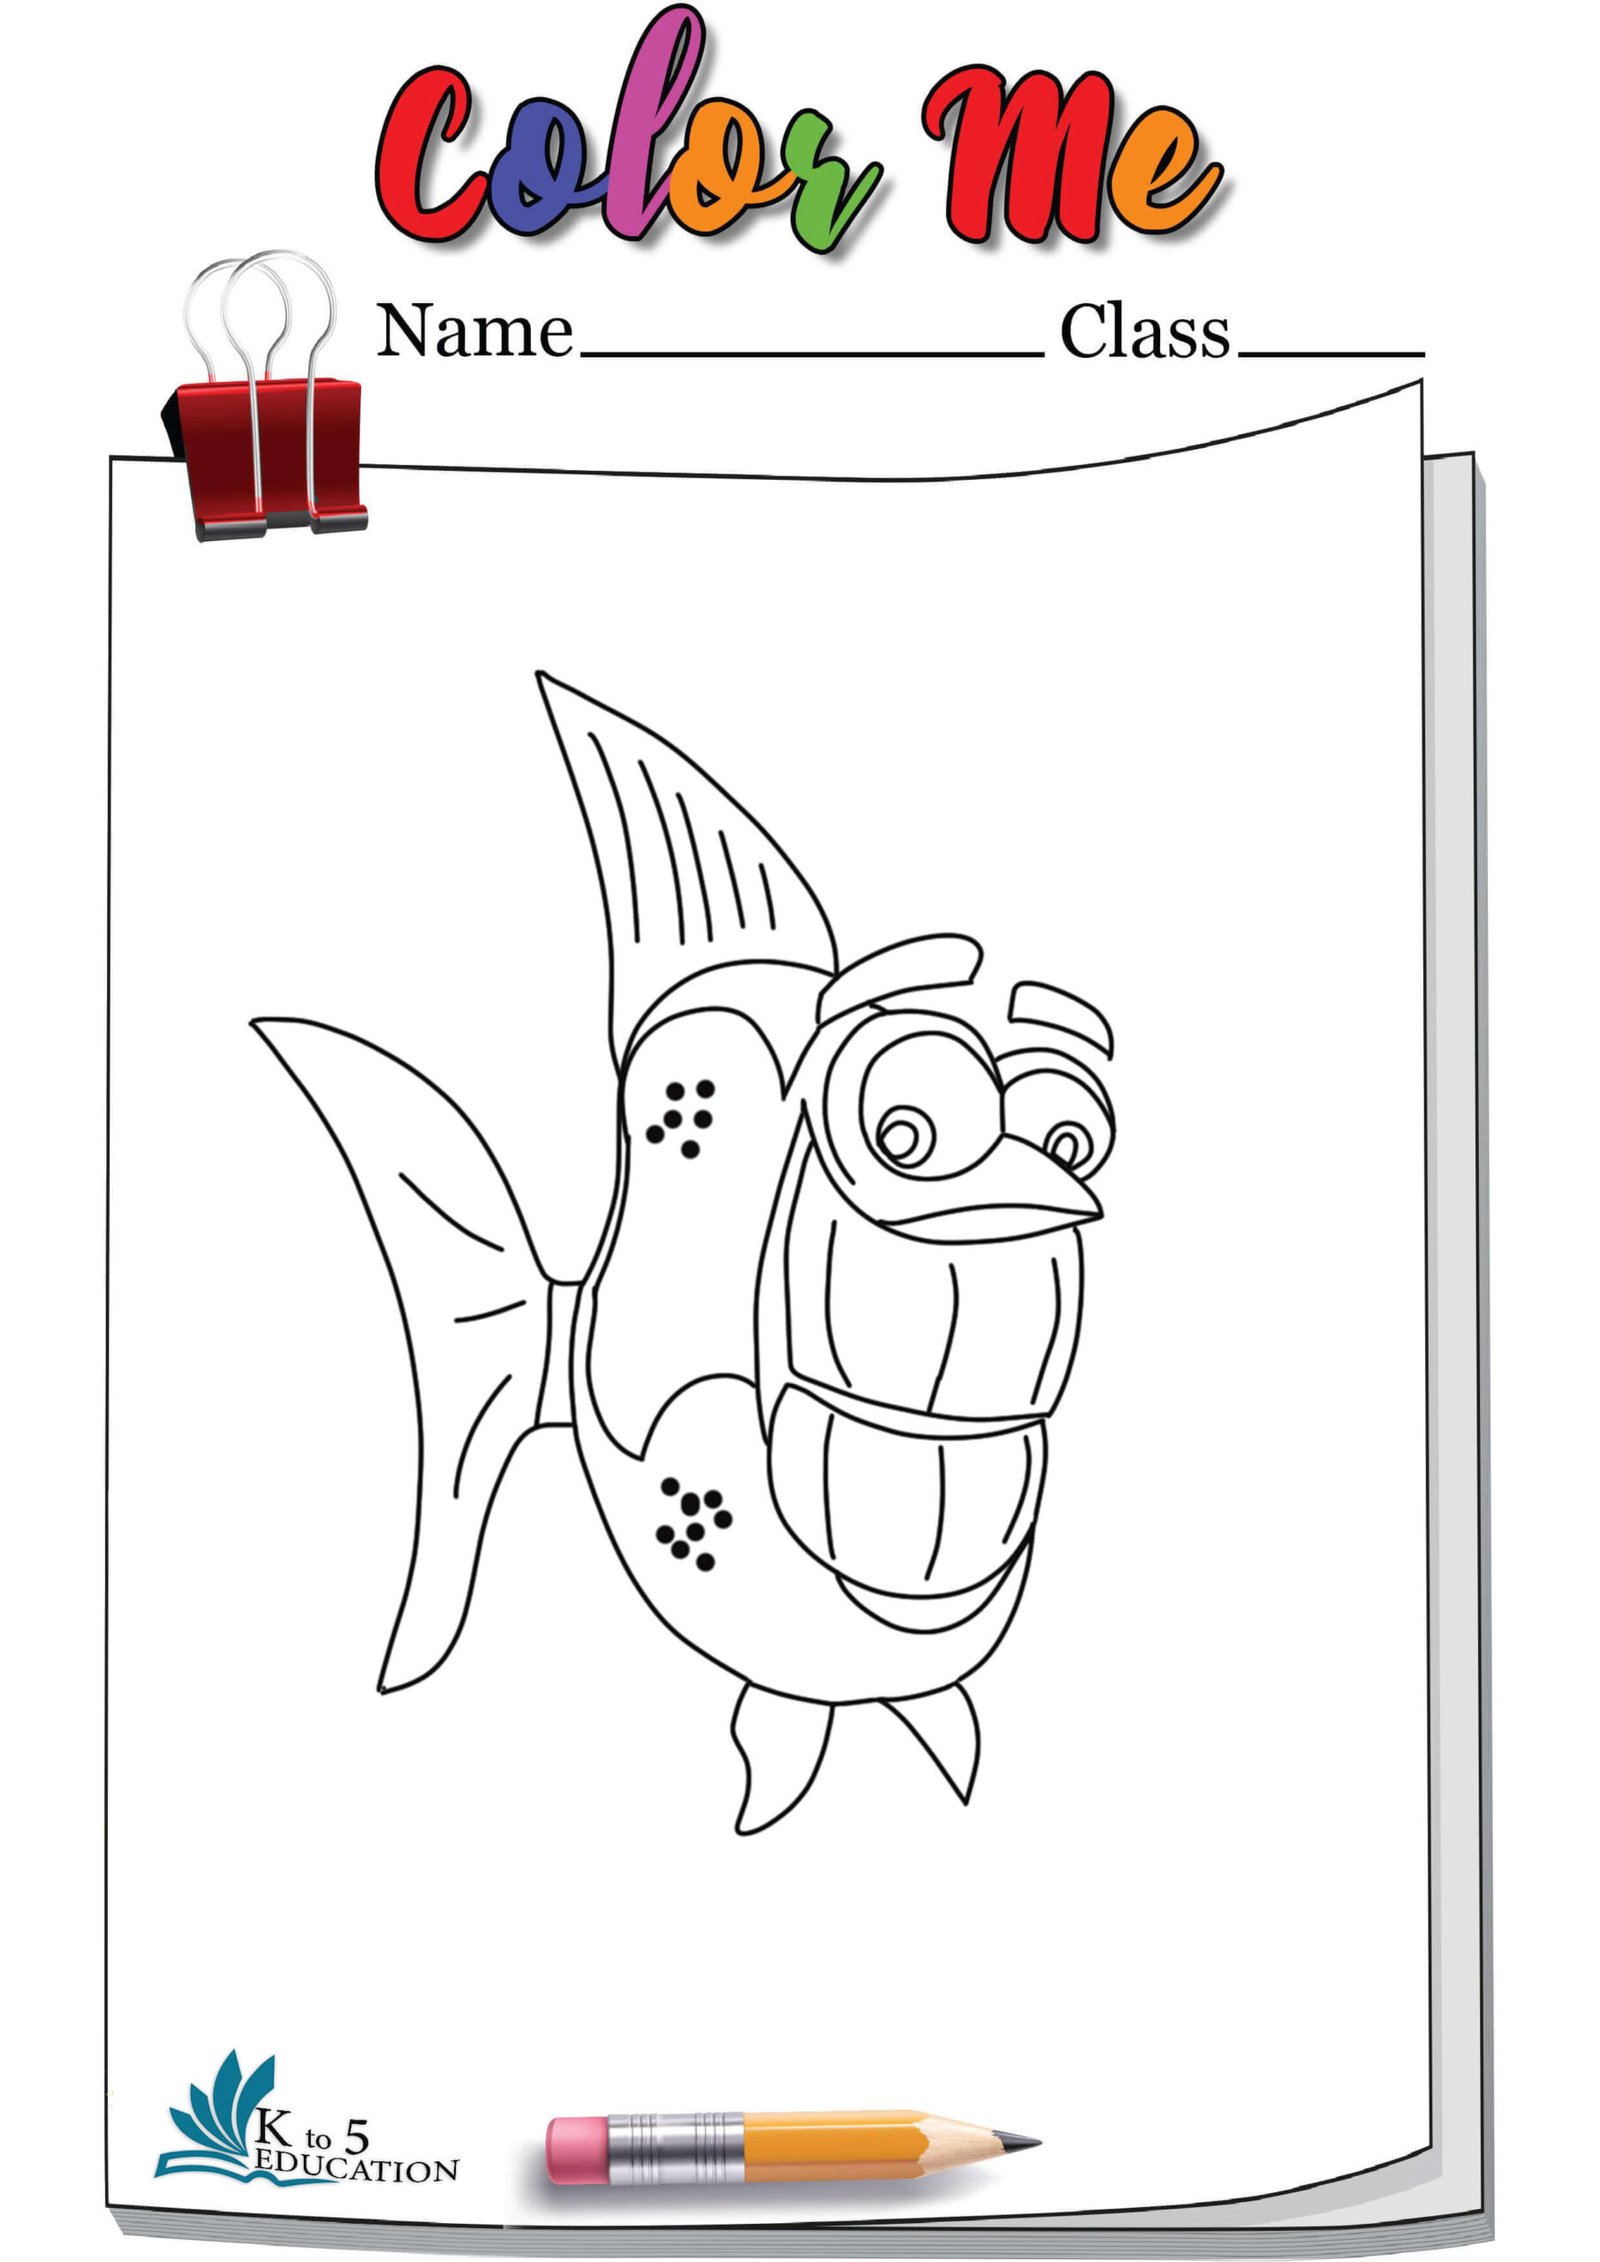 Finding Nemo Coloring Page